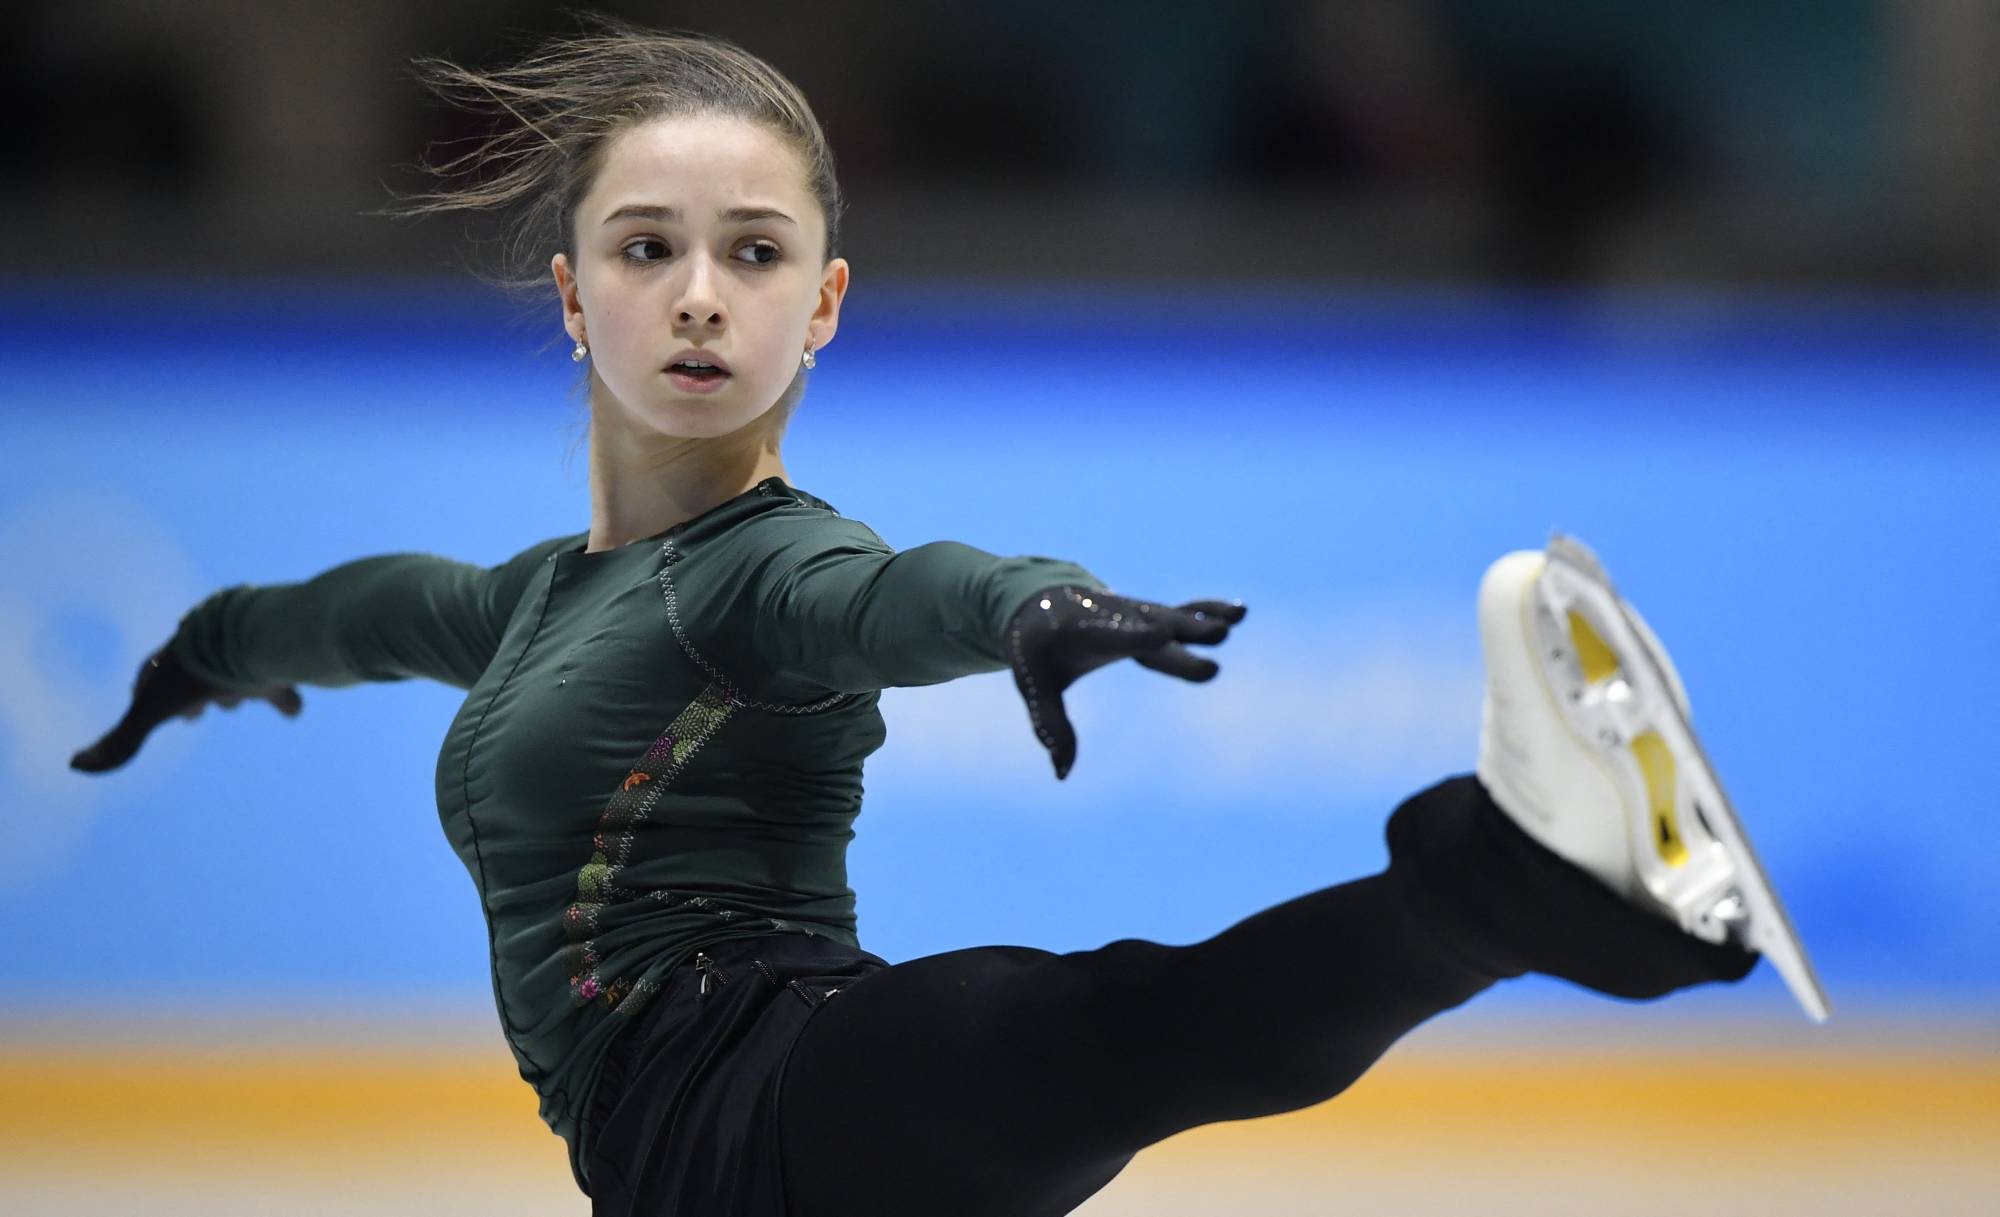 Fate of star skater Kamila Valieva in limbo after doping allegation emerges  | The Japan Times